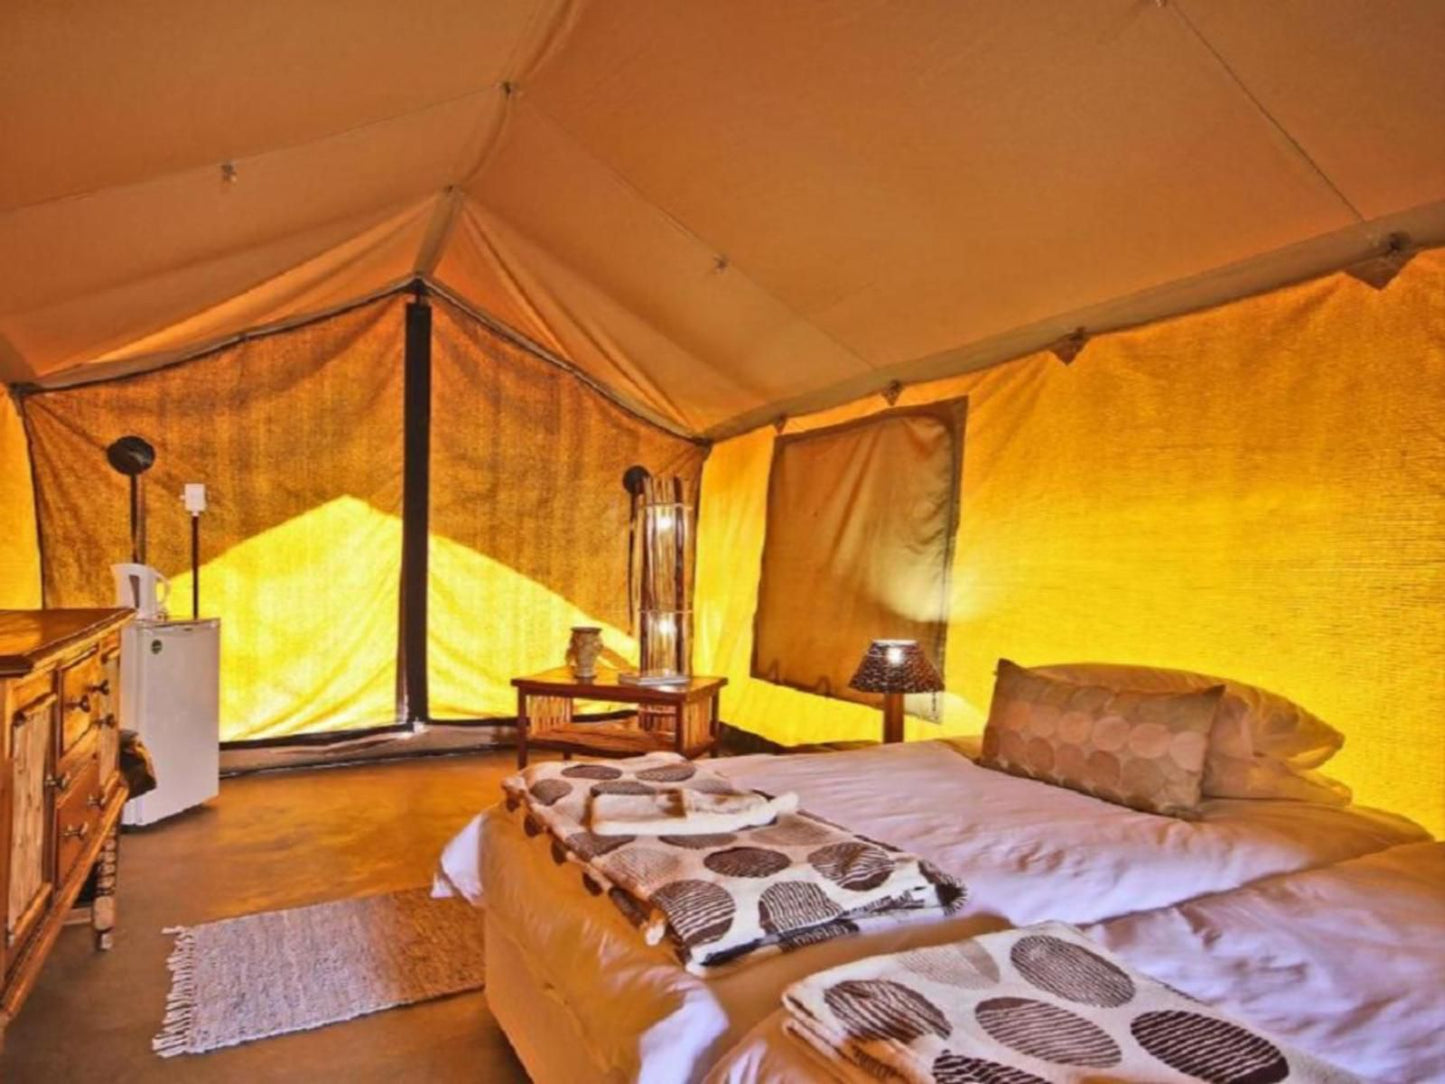 Frontier River Resort Vioolsdrift Northern Cape South Africa Colorful, Tent, Architecture, Bedroom